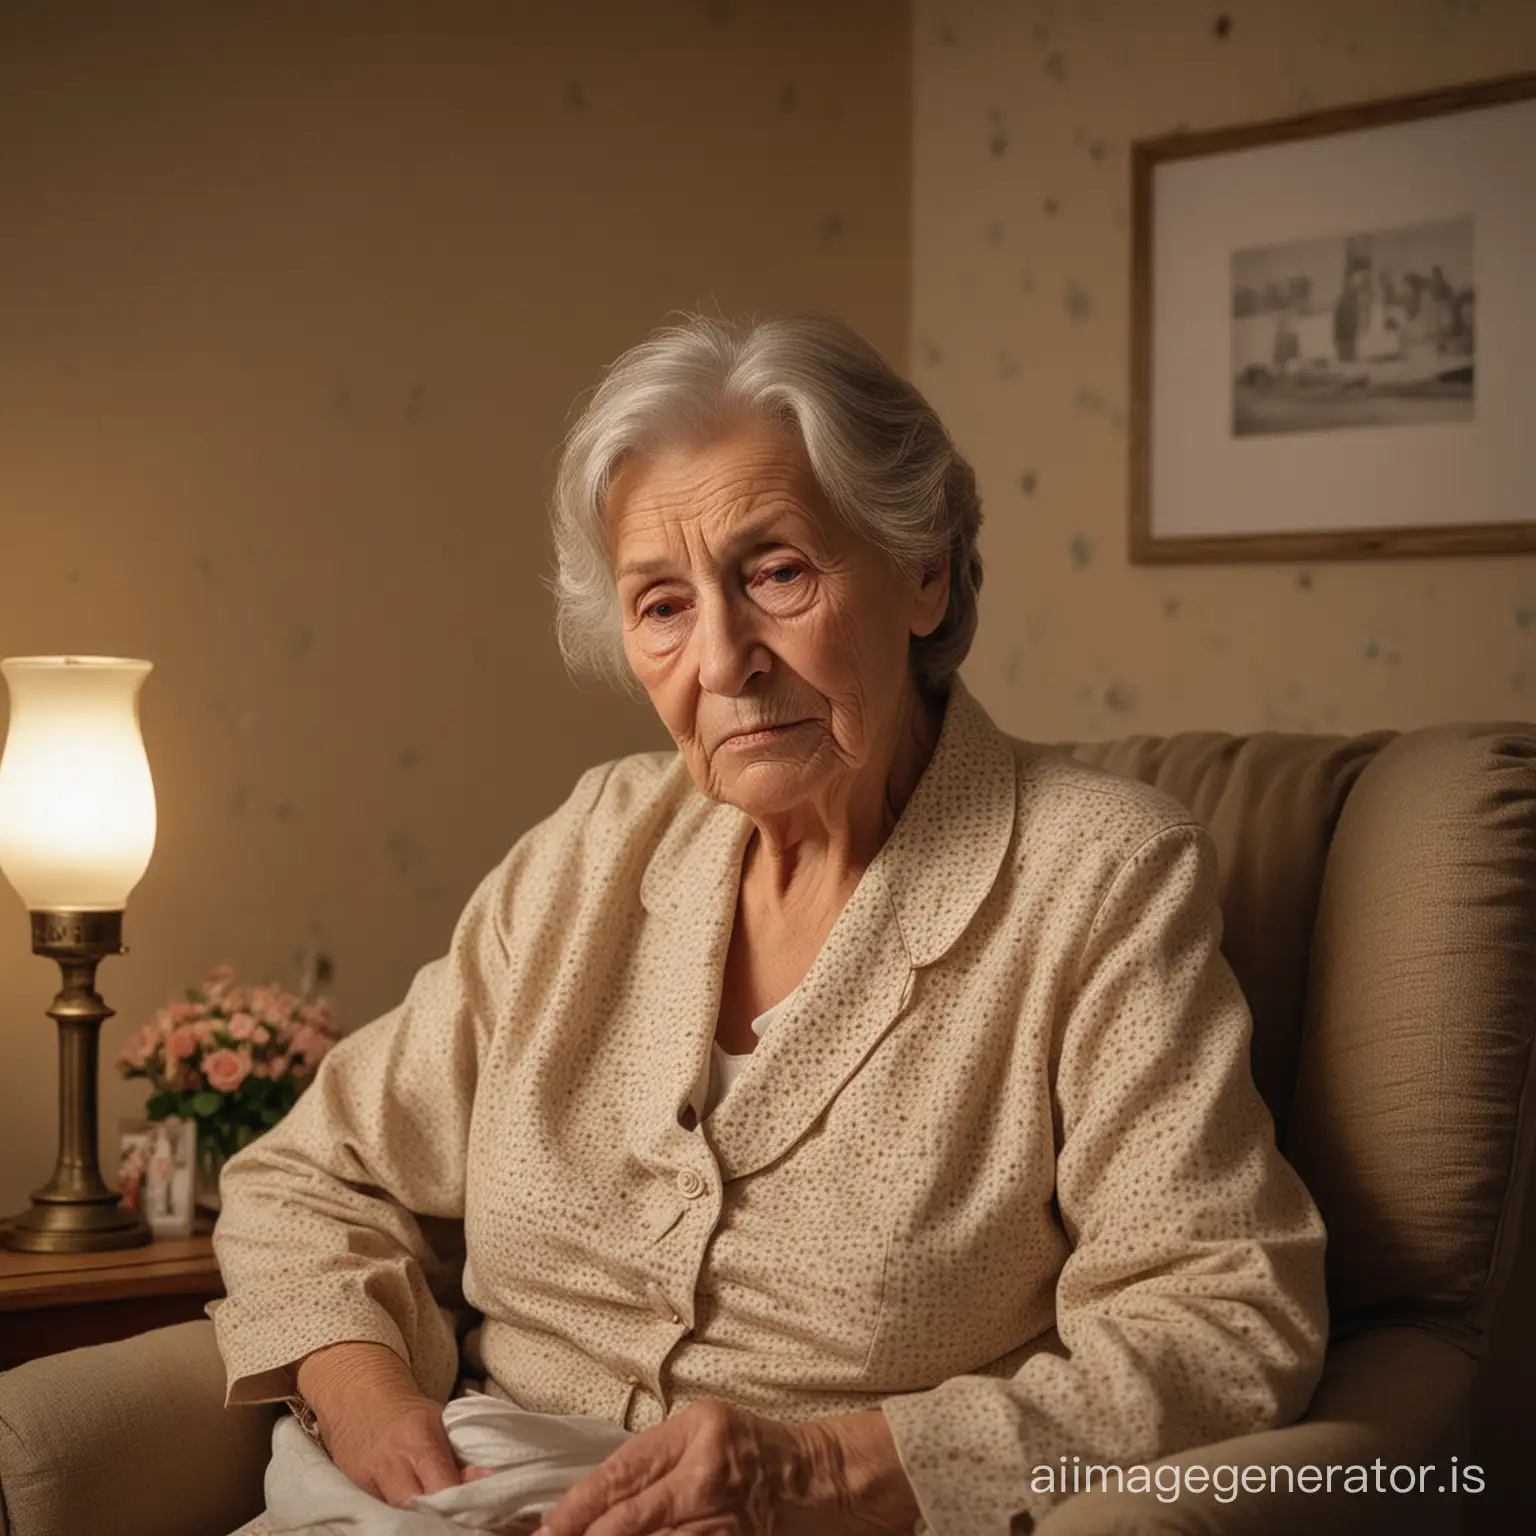 Photograph of an elderly woman who is sad looking at a photograph she holds in her hand sitting in an armchair in a bedroom, which has very little illumination